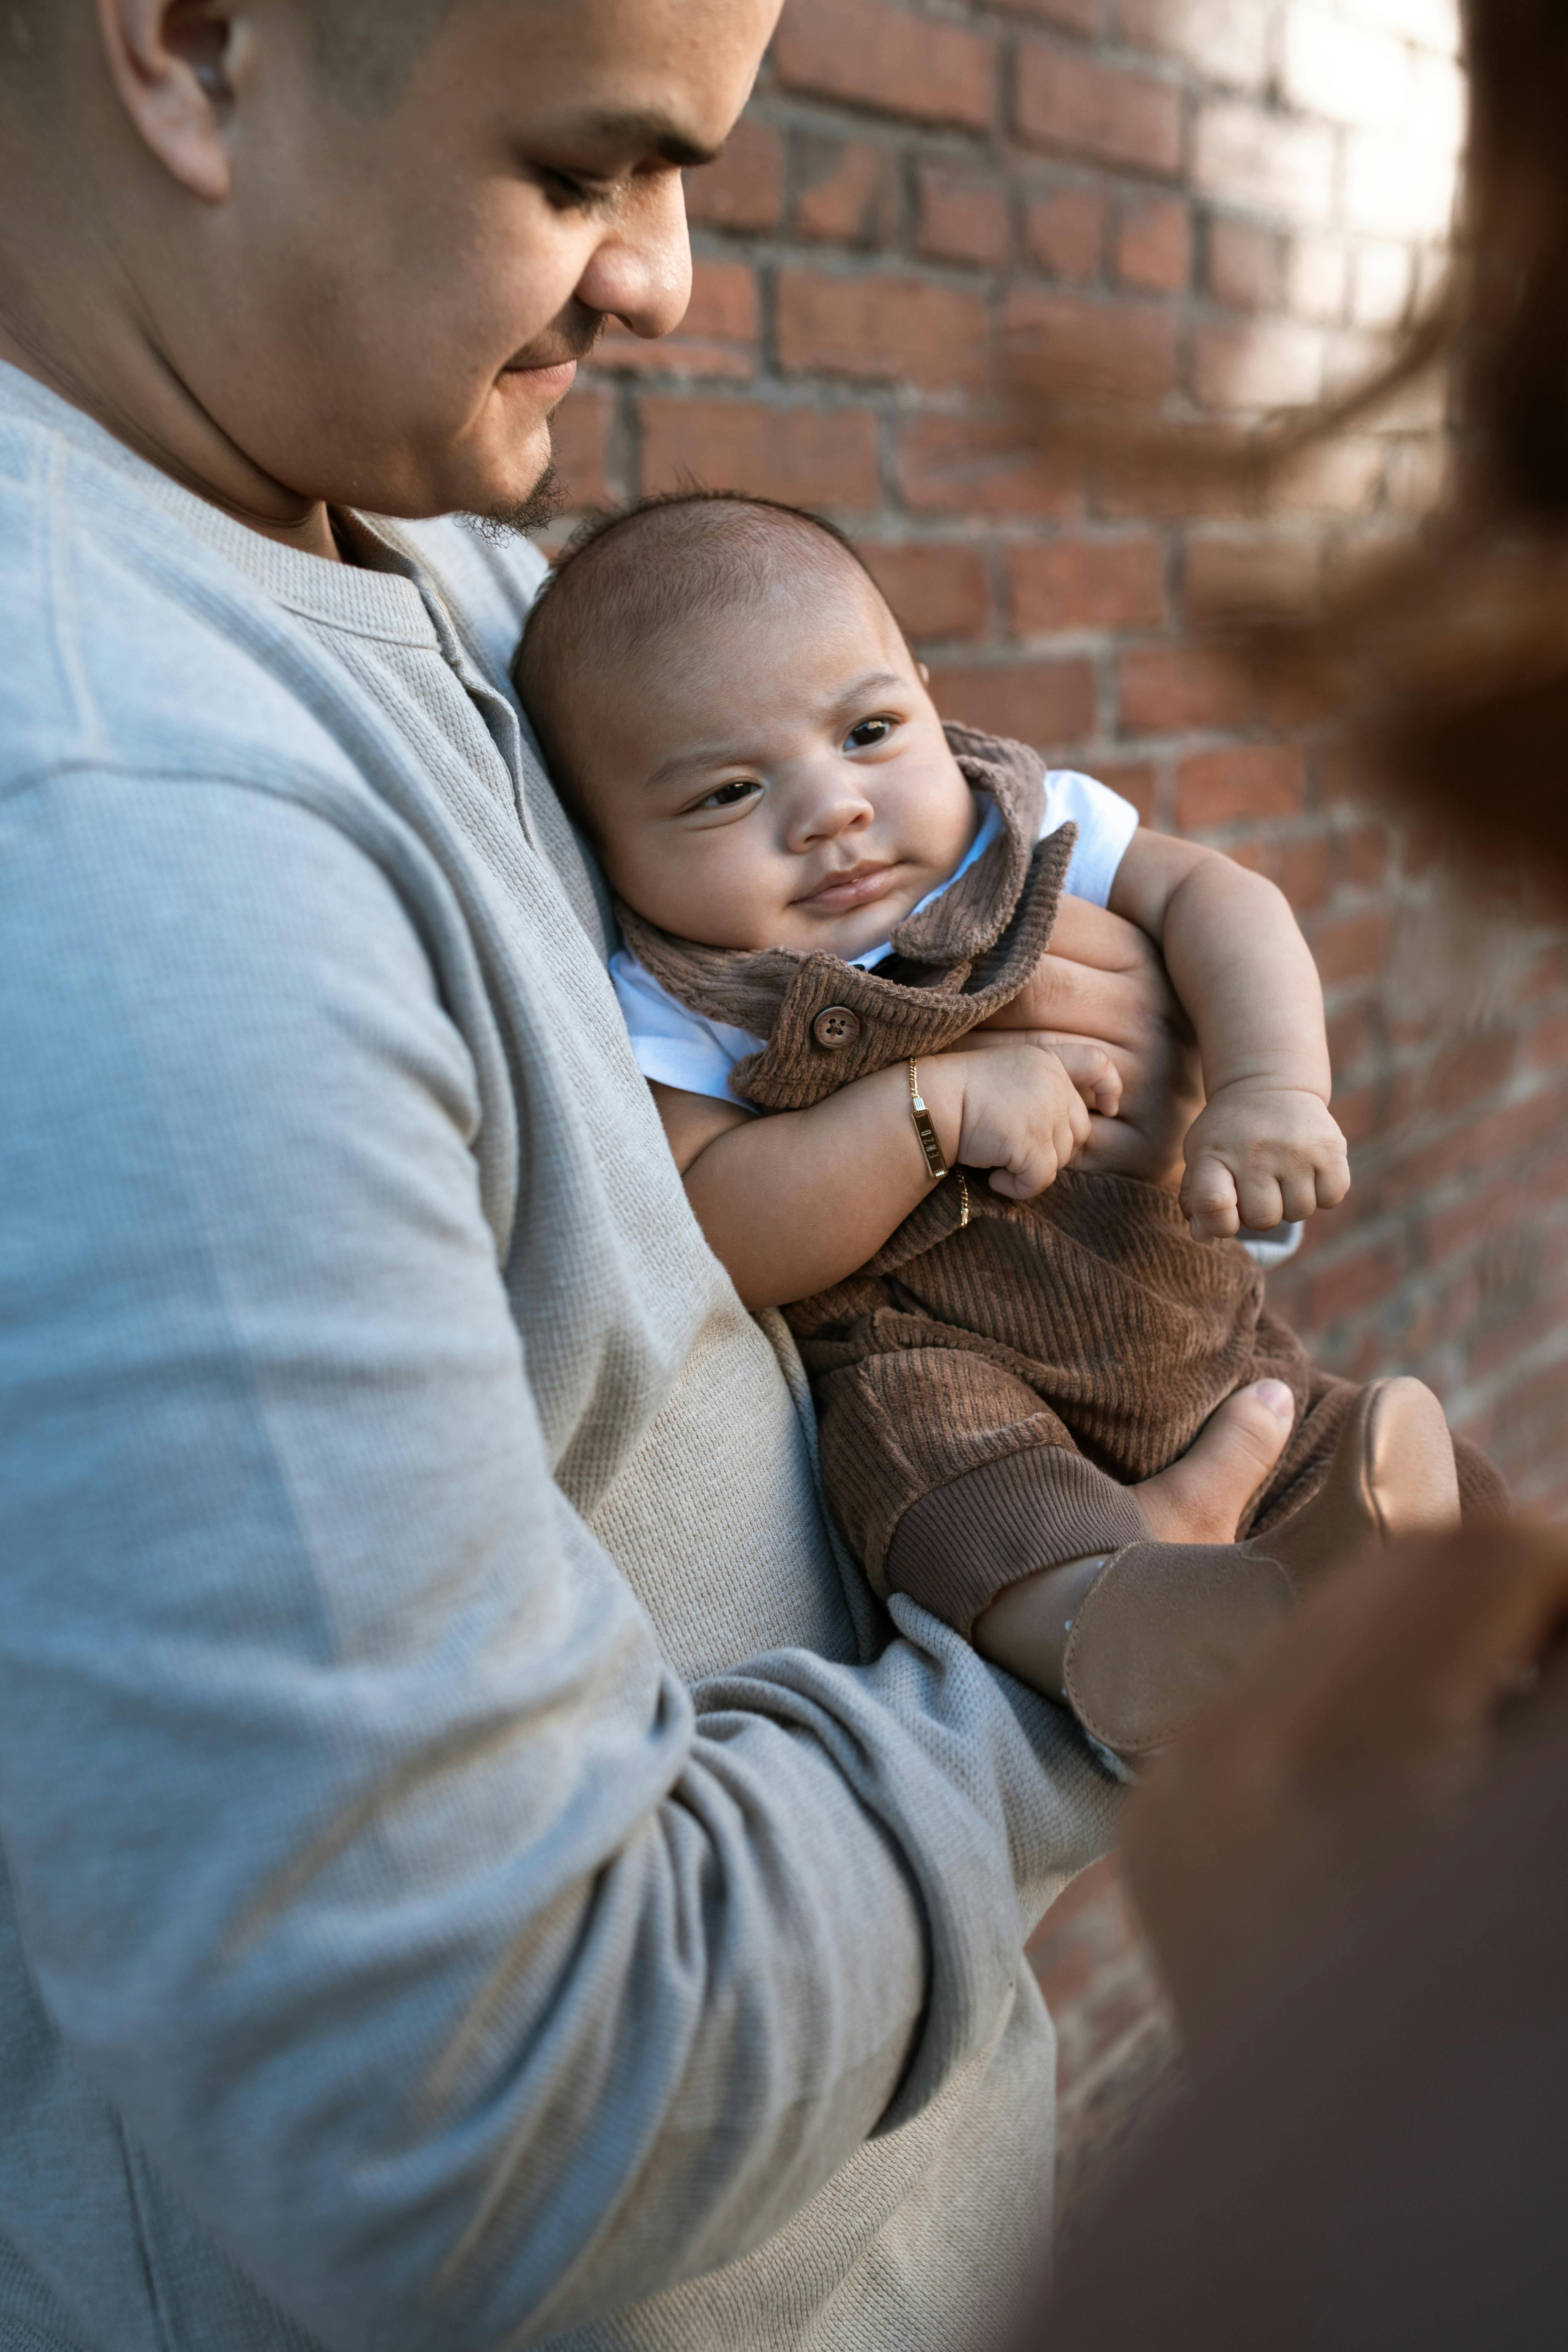 James and his best friend's baby boy, sparking a change in heart | Source: Pexels